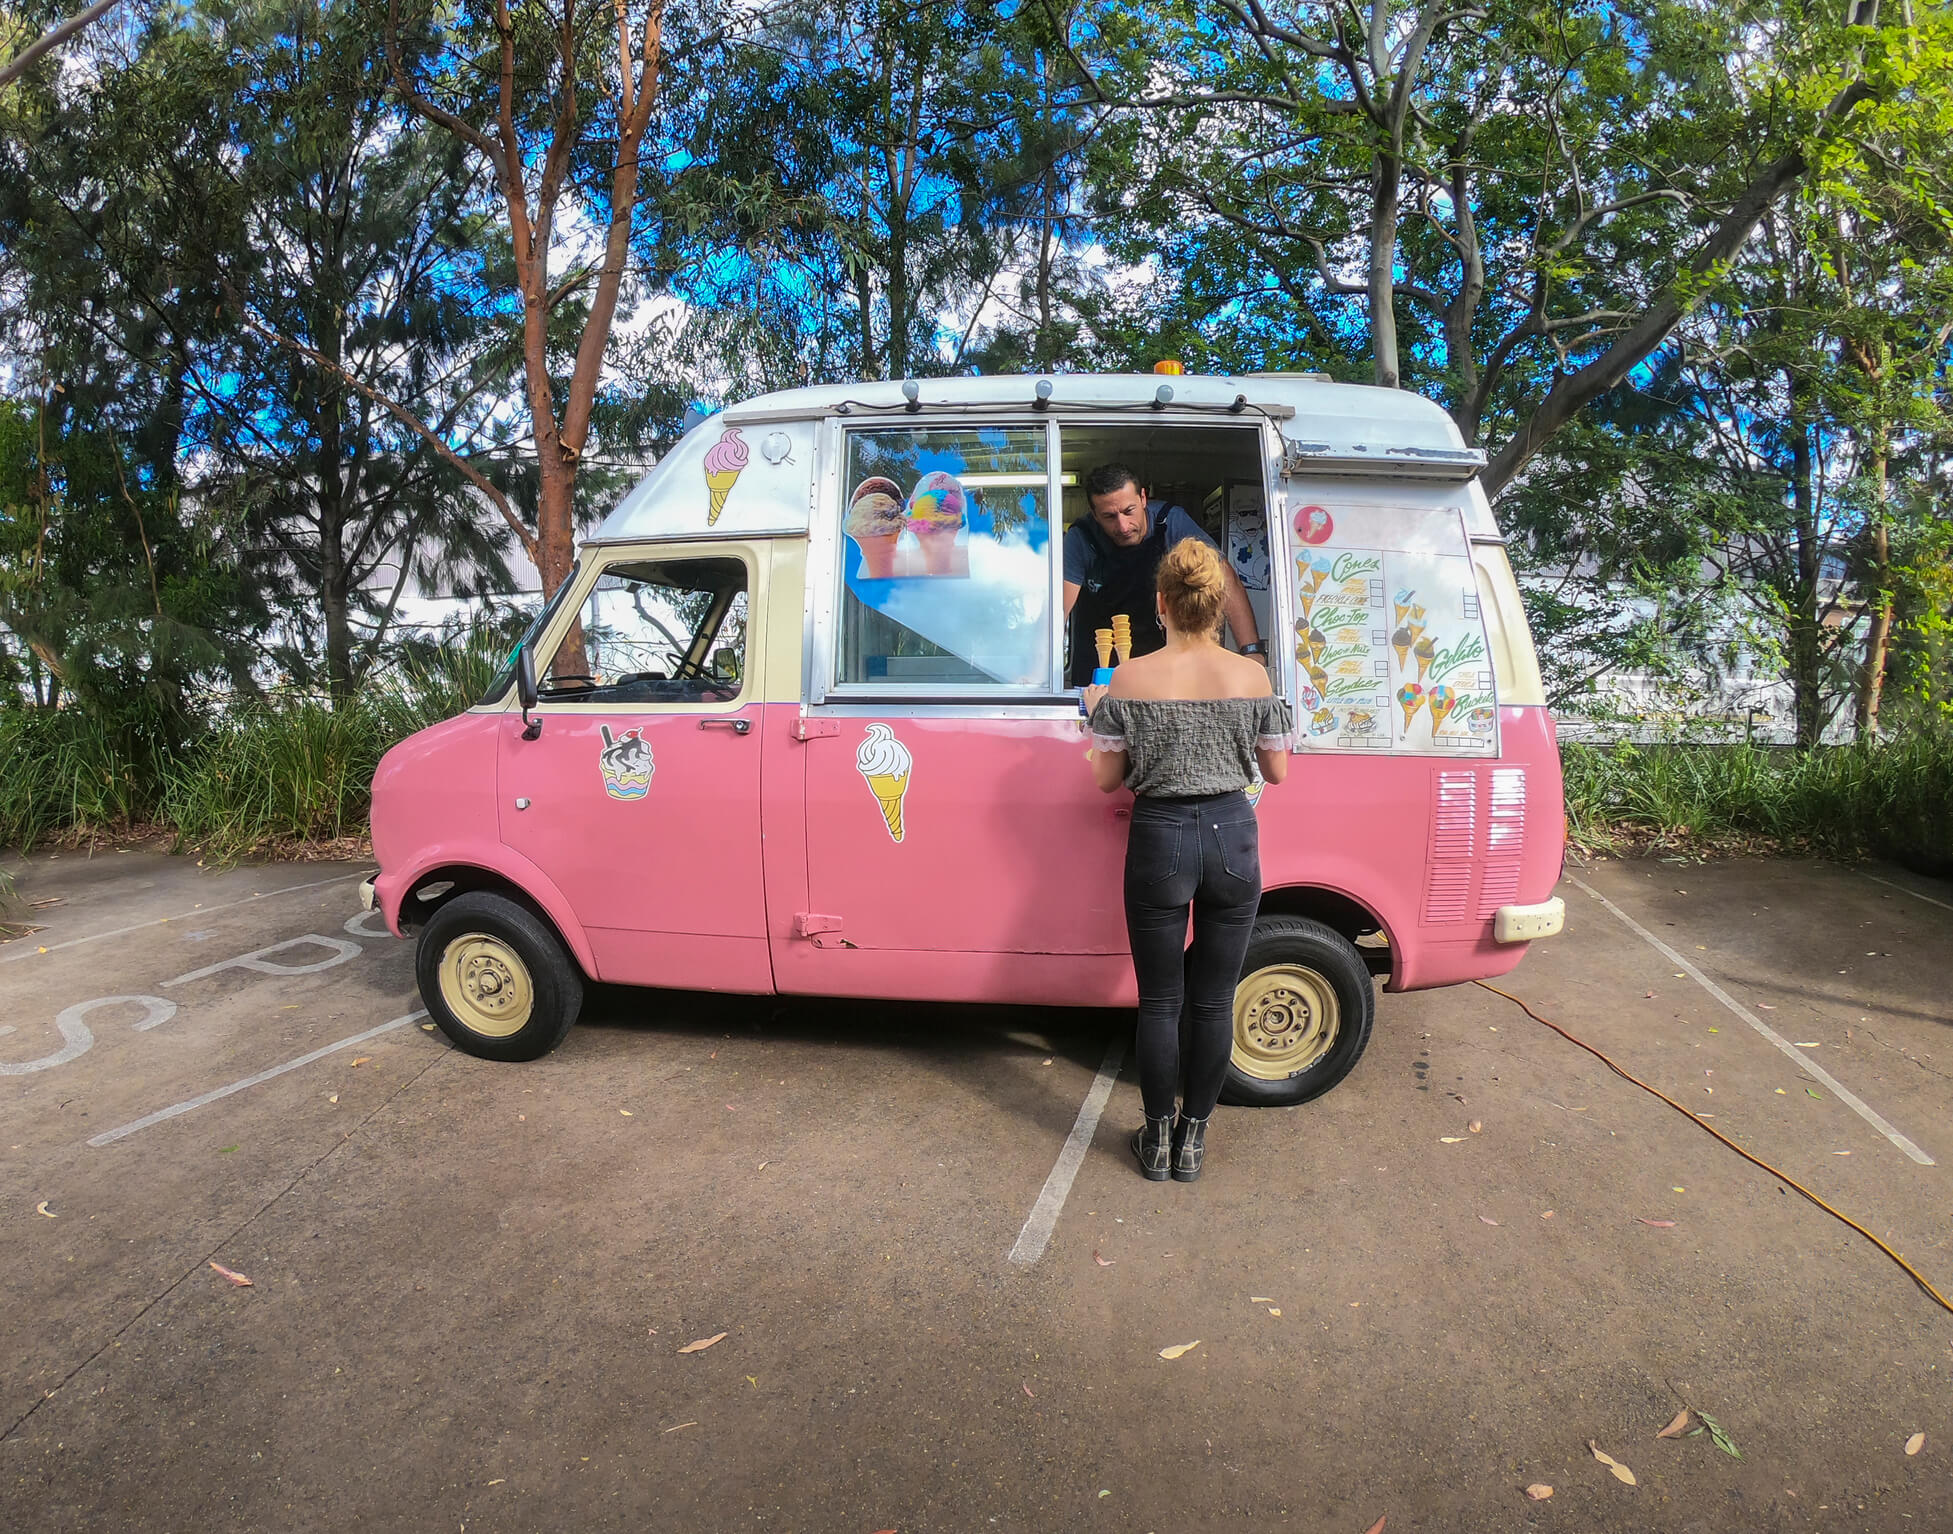 Woman buying an icecream from the icecream truck